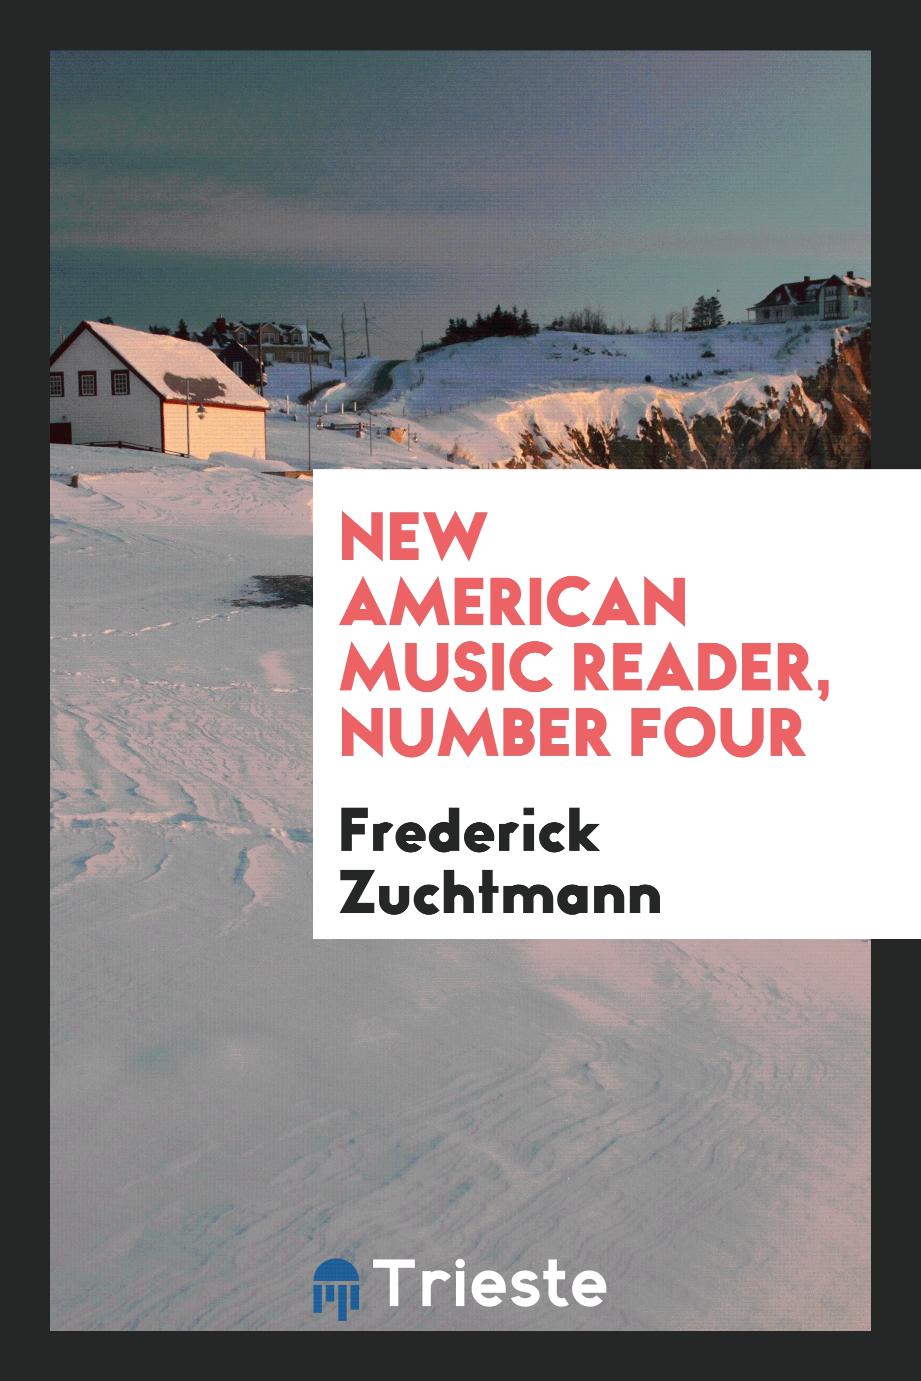 New American music reader, number four